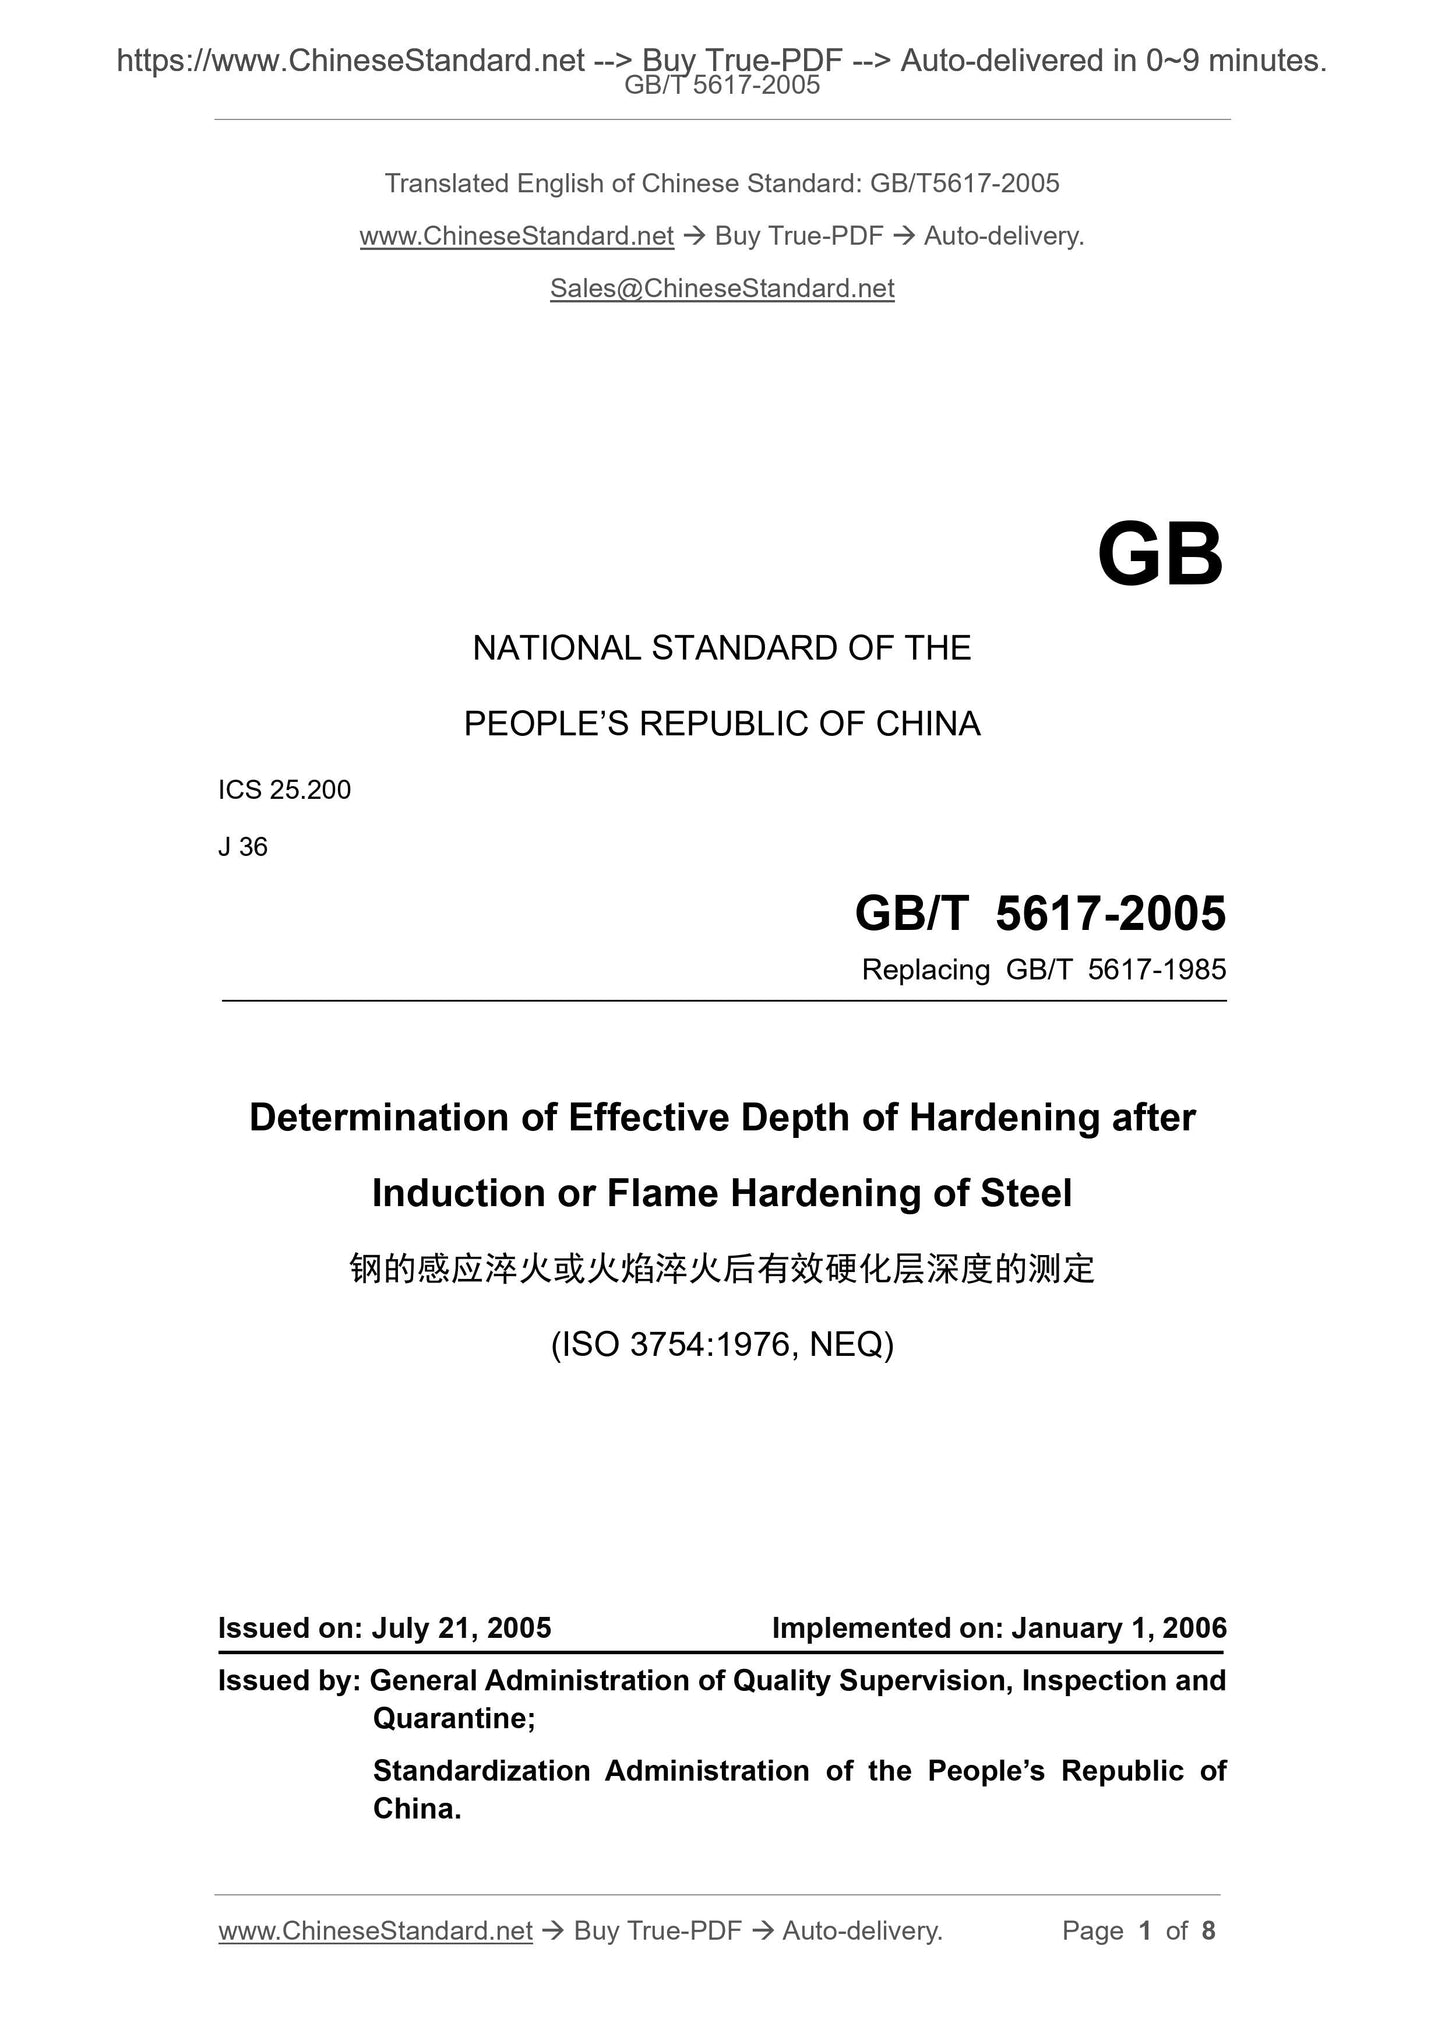 GB/T 5617-2005 Page 1